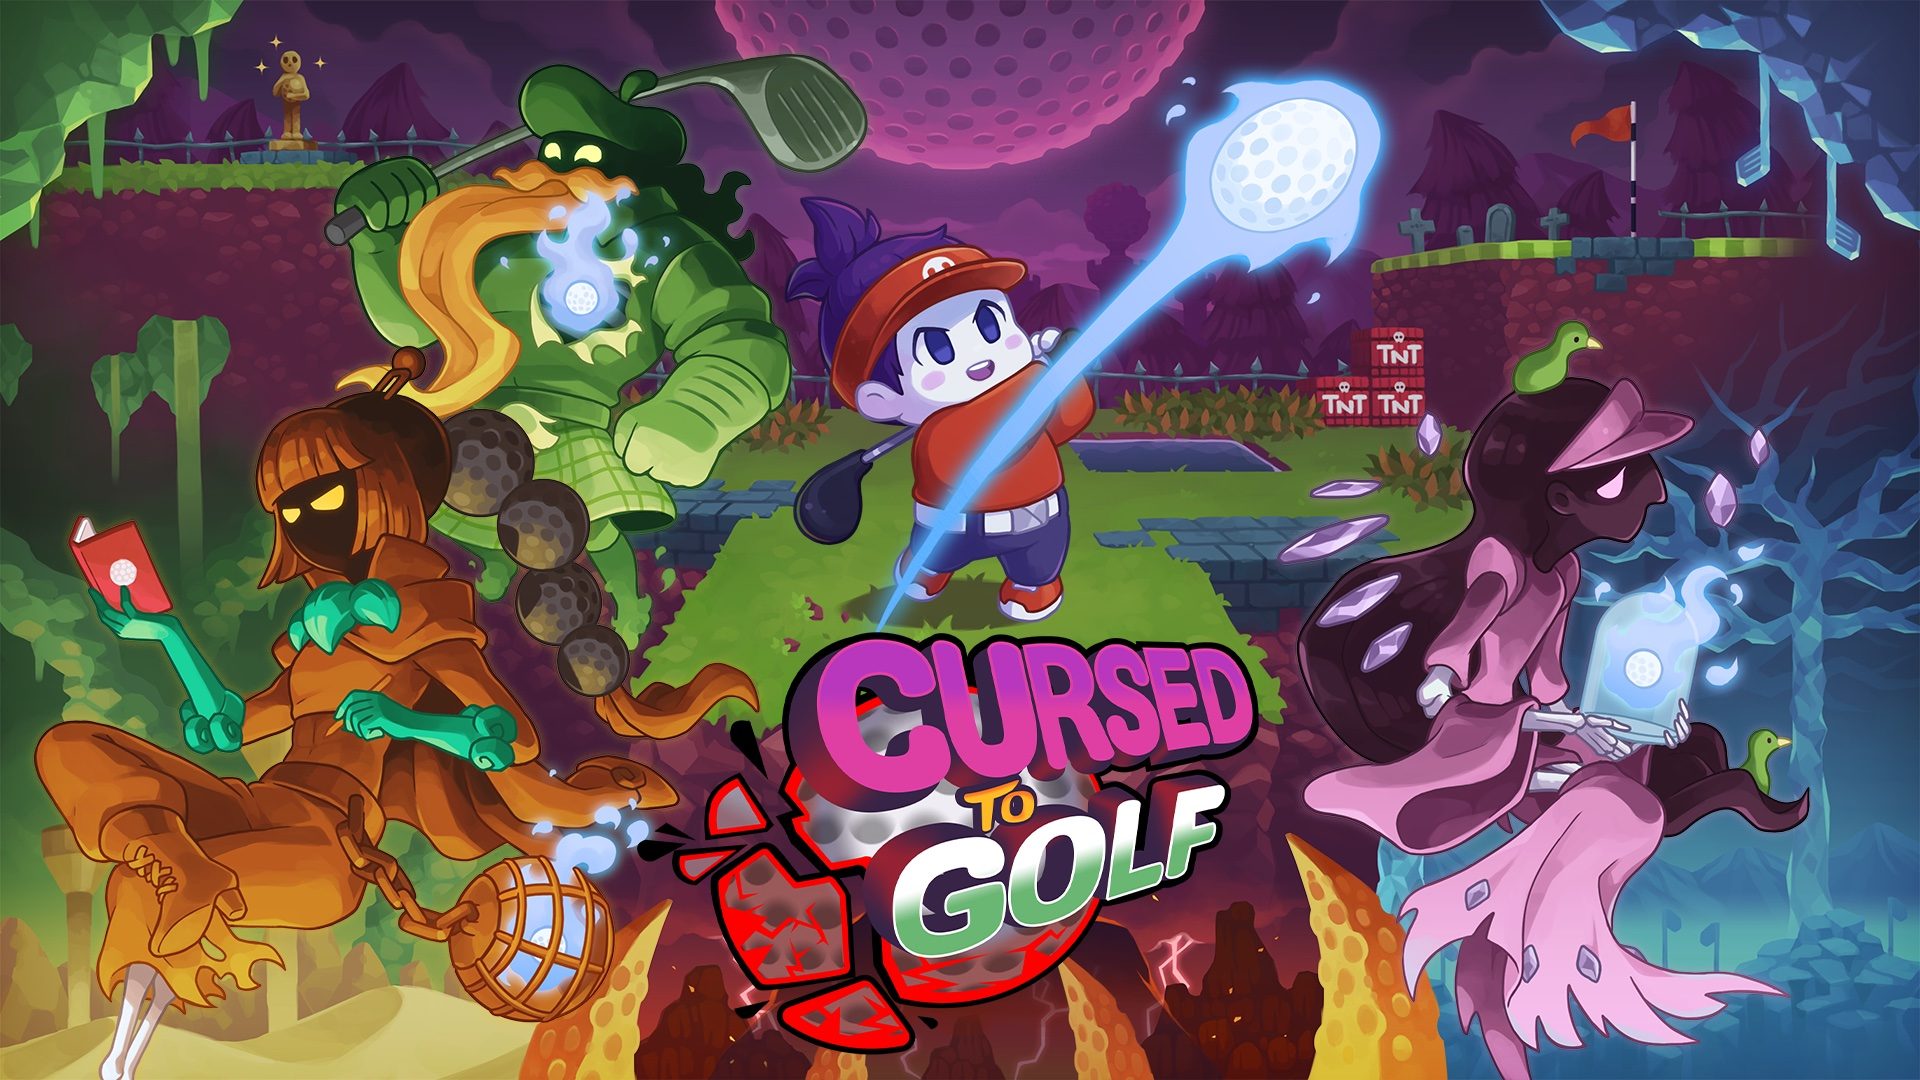 Cursed to Golf tees off on August 18 for PS5 and PS4 – PlayStation.Blog